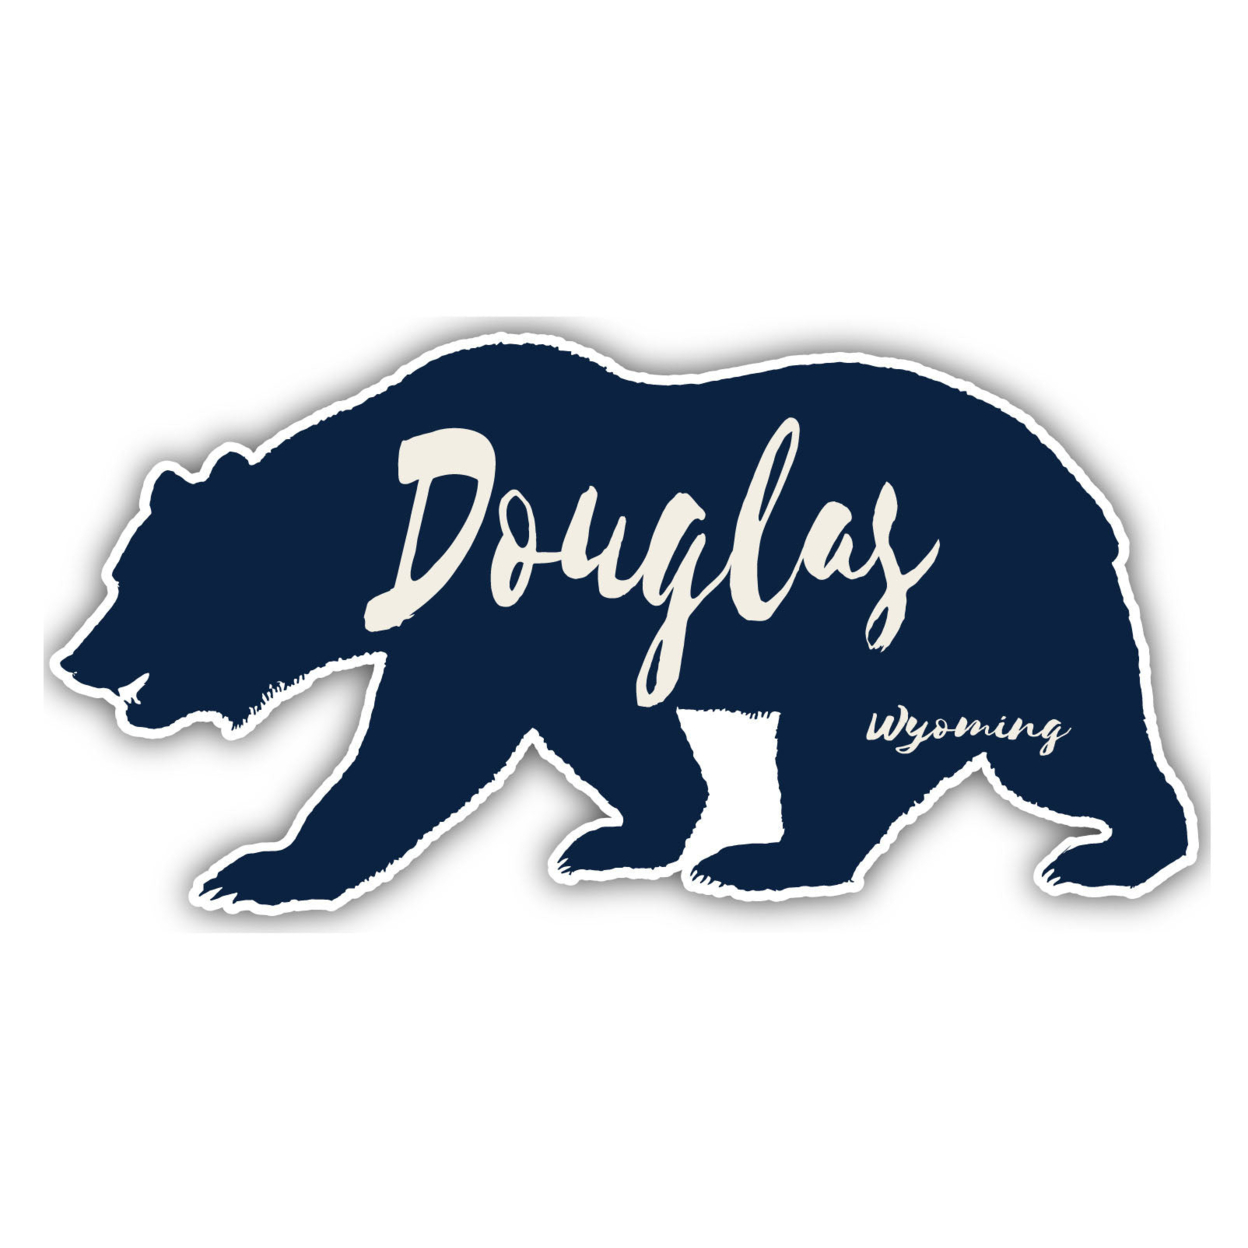 Douglas Wyoming Souvenir Decorative Stickers (Choose Theme And Size) - 4-Pack, 6-Inch, Great Outdoors